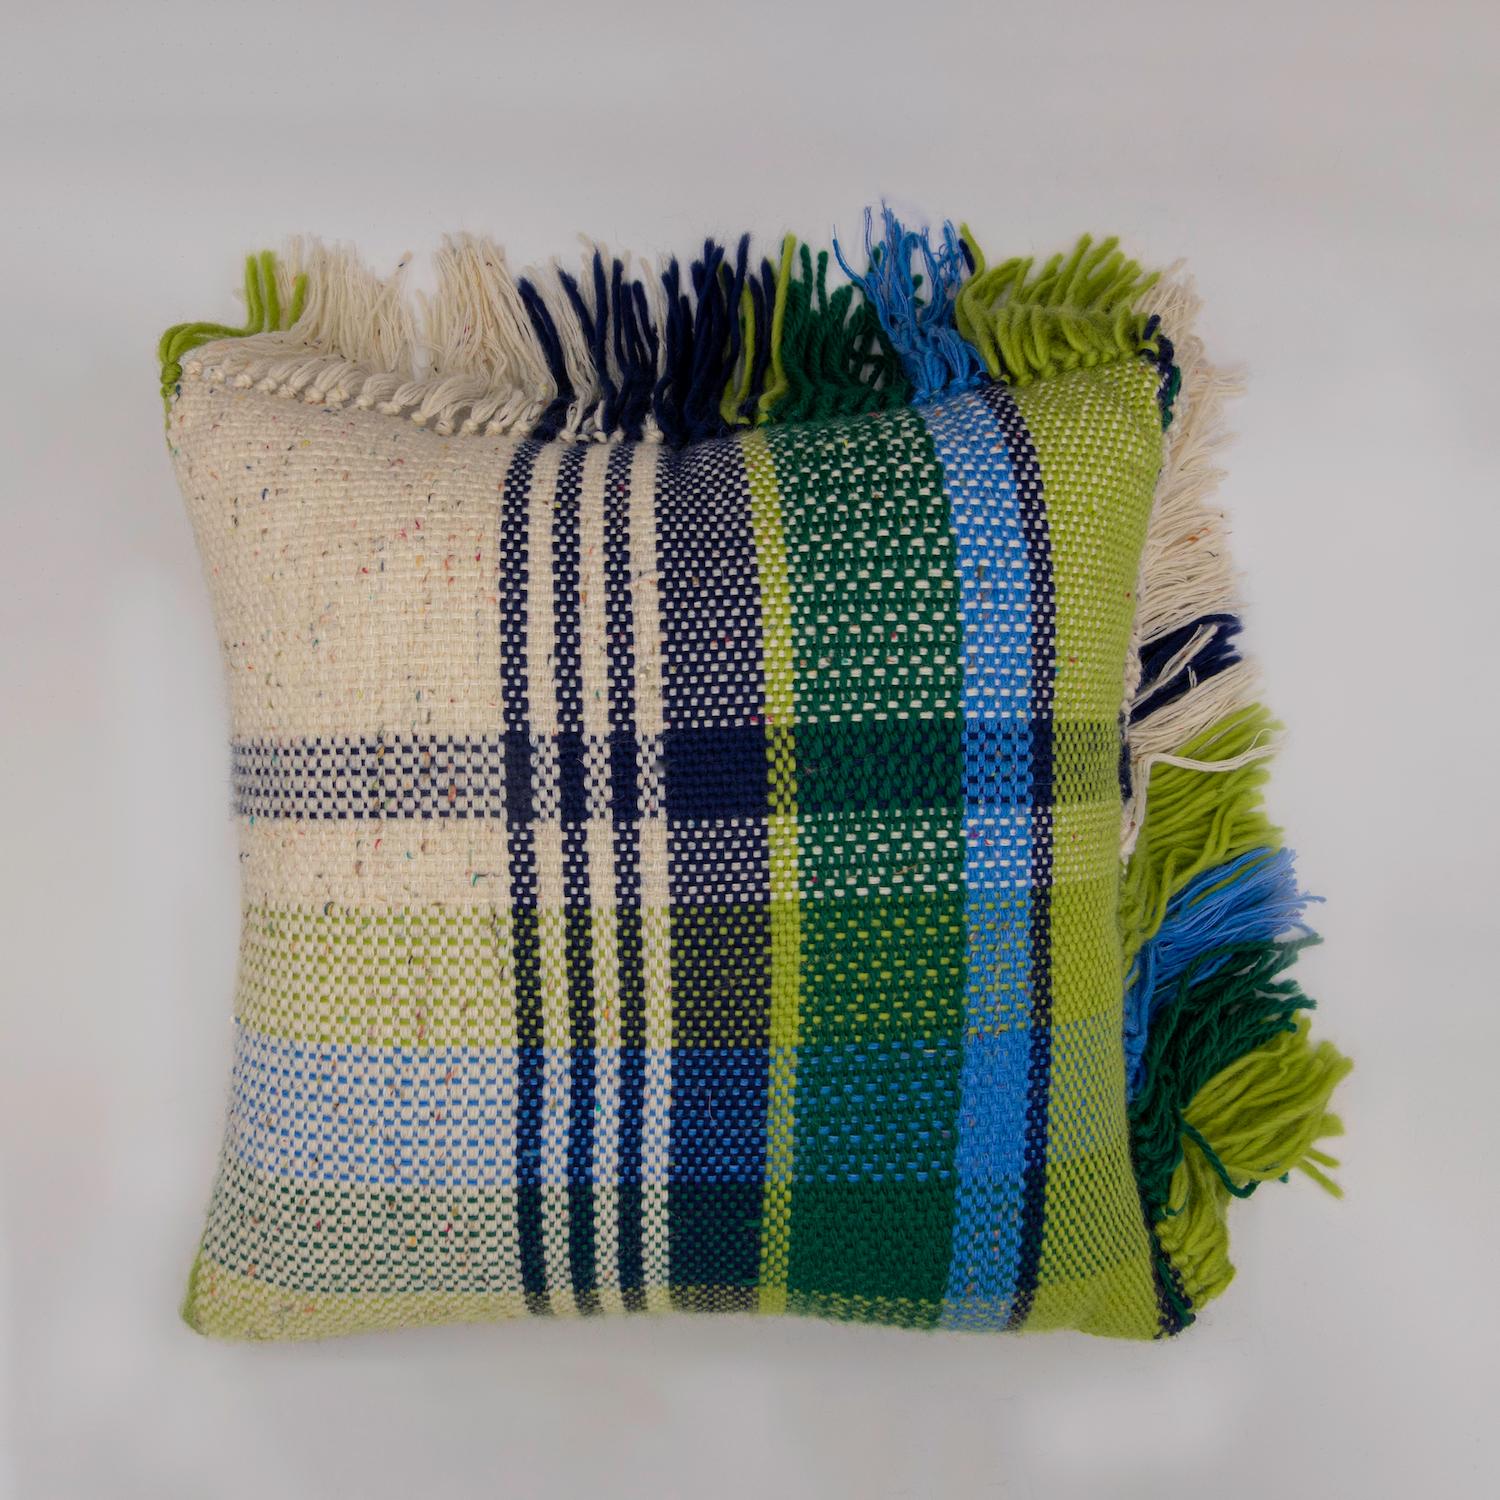 Handwoven in Tuscany with wool from Sardegna, each cushion takes more than two days for an artisan to create. Each side of the cushion has a variation of the signature plaid in an alternating colorway. BURGIO. has chosen to firmly stuff each cushion